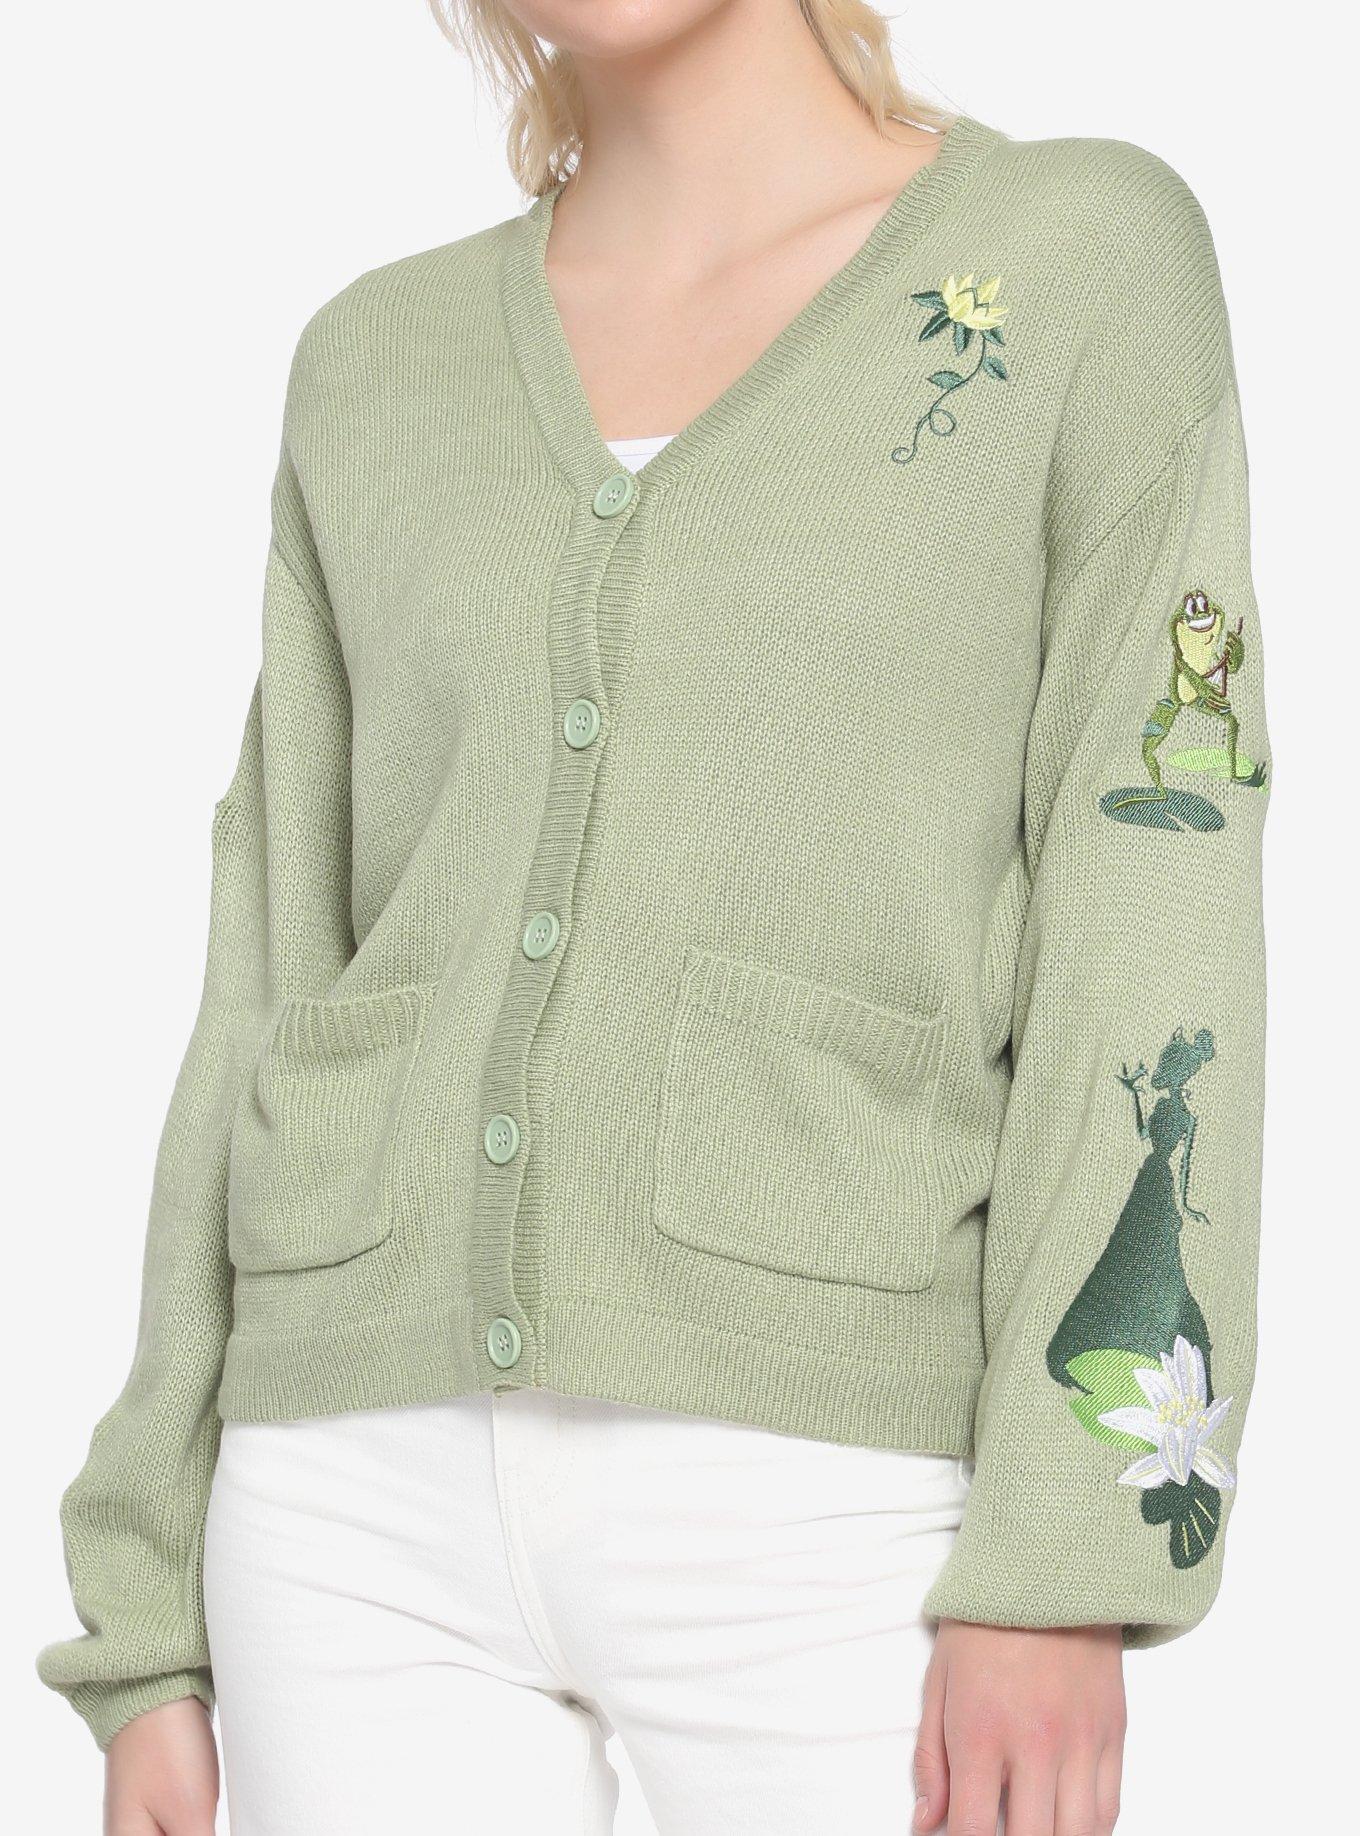 Disney The Princess And The Frog Chunky Knit Skimmer Girls Cardigan, MULTI, hi-res